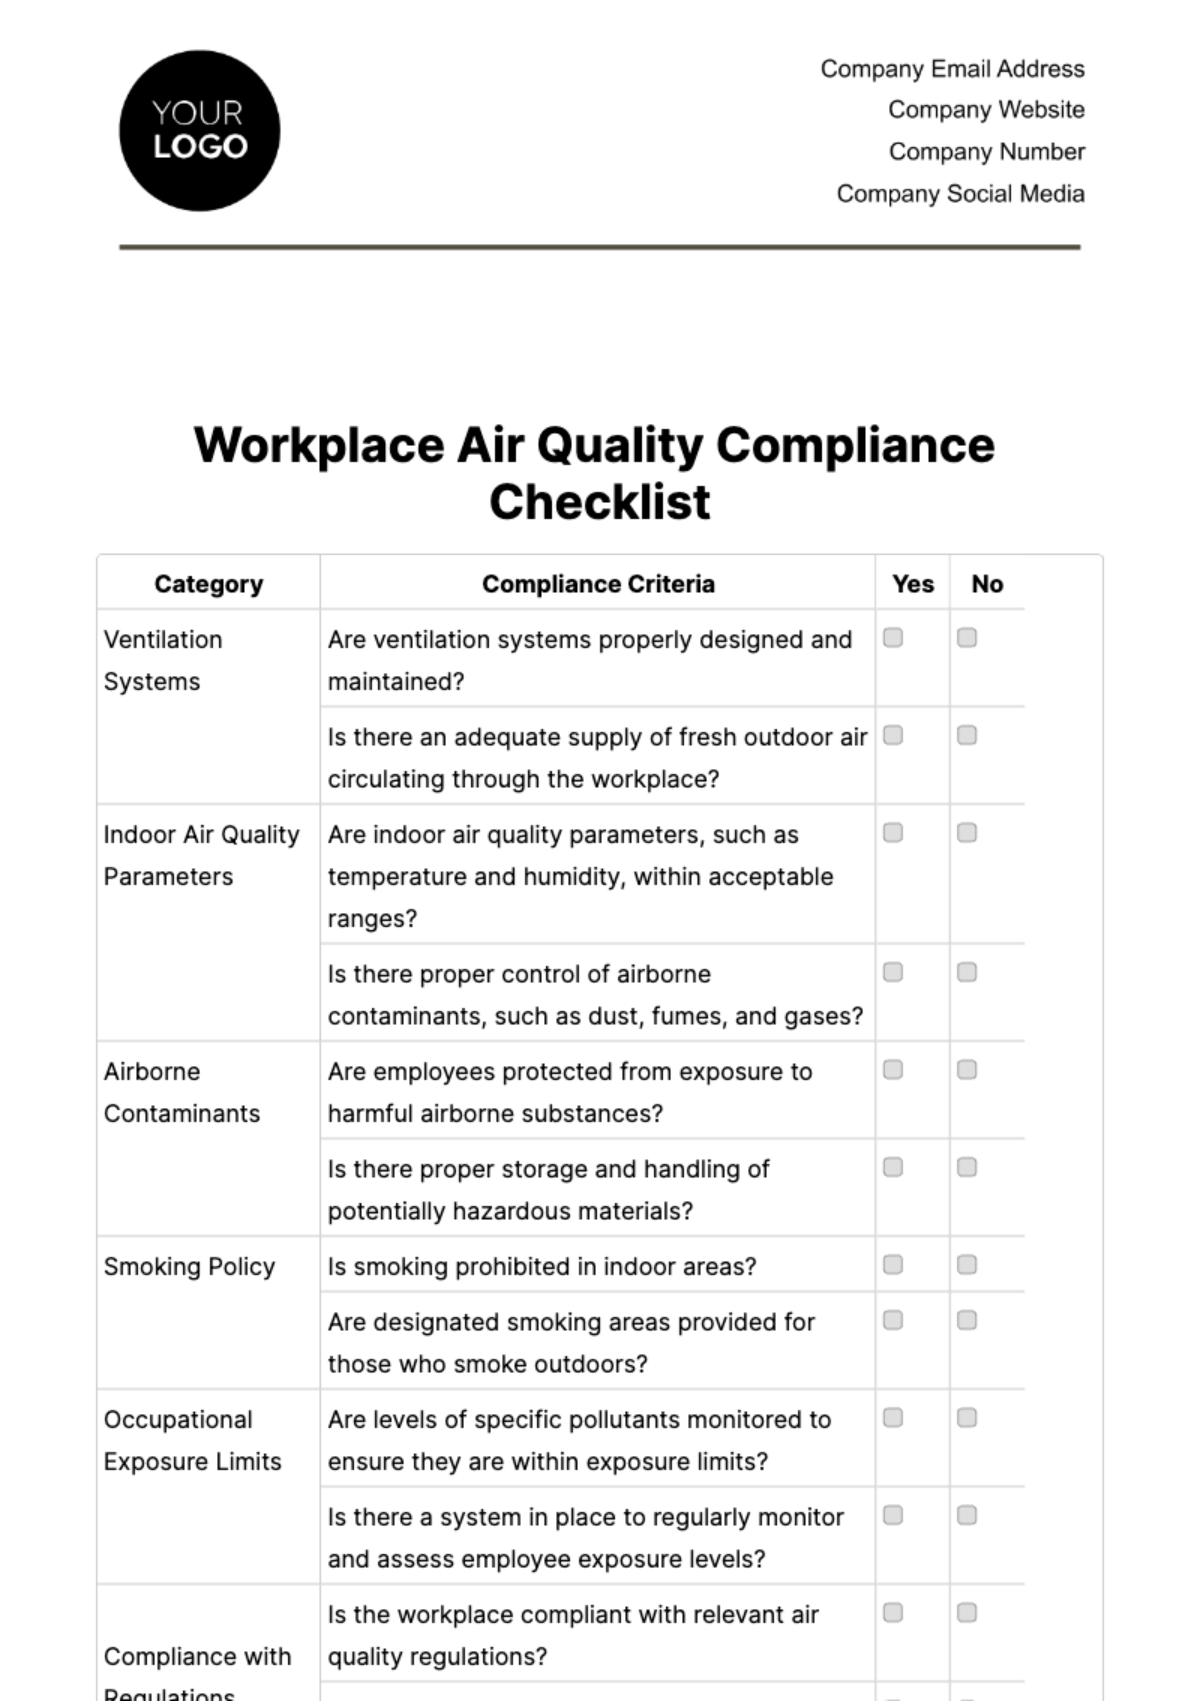 Workplace Air Quality Compliance Checklist Template